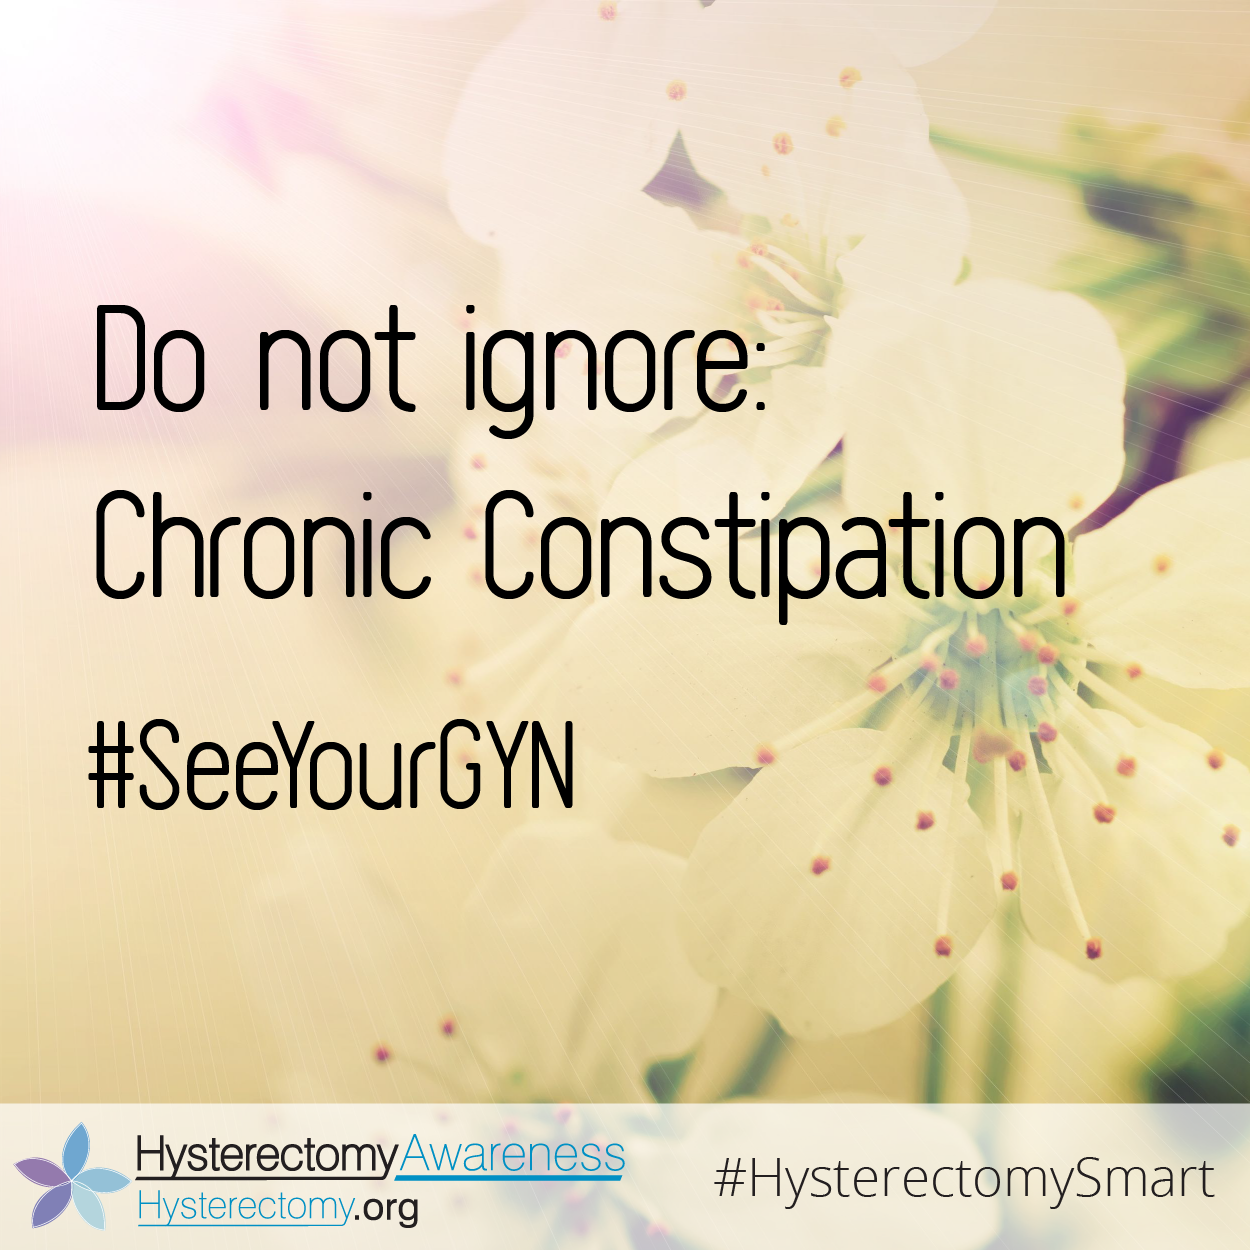 Do not ignore: Chronic Constipation #SeeYourGYN #HysterectomySmart